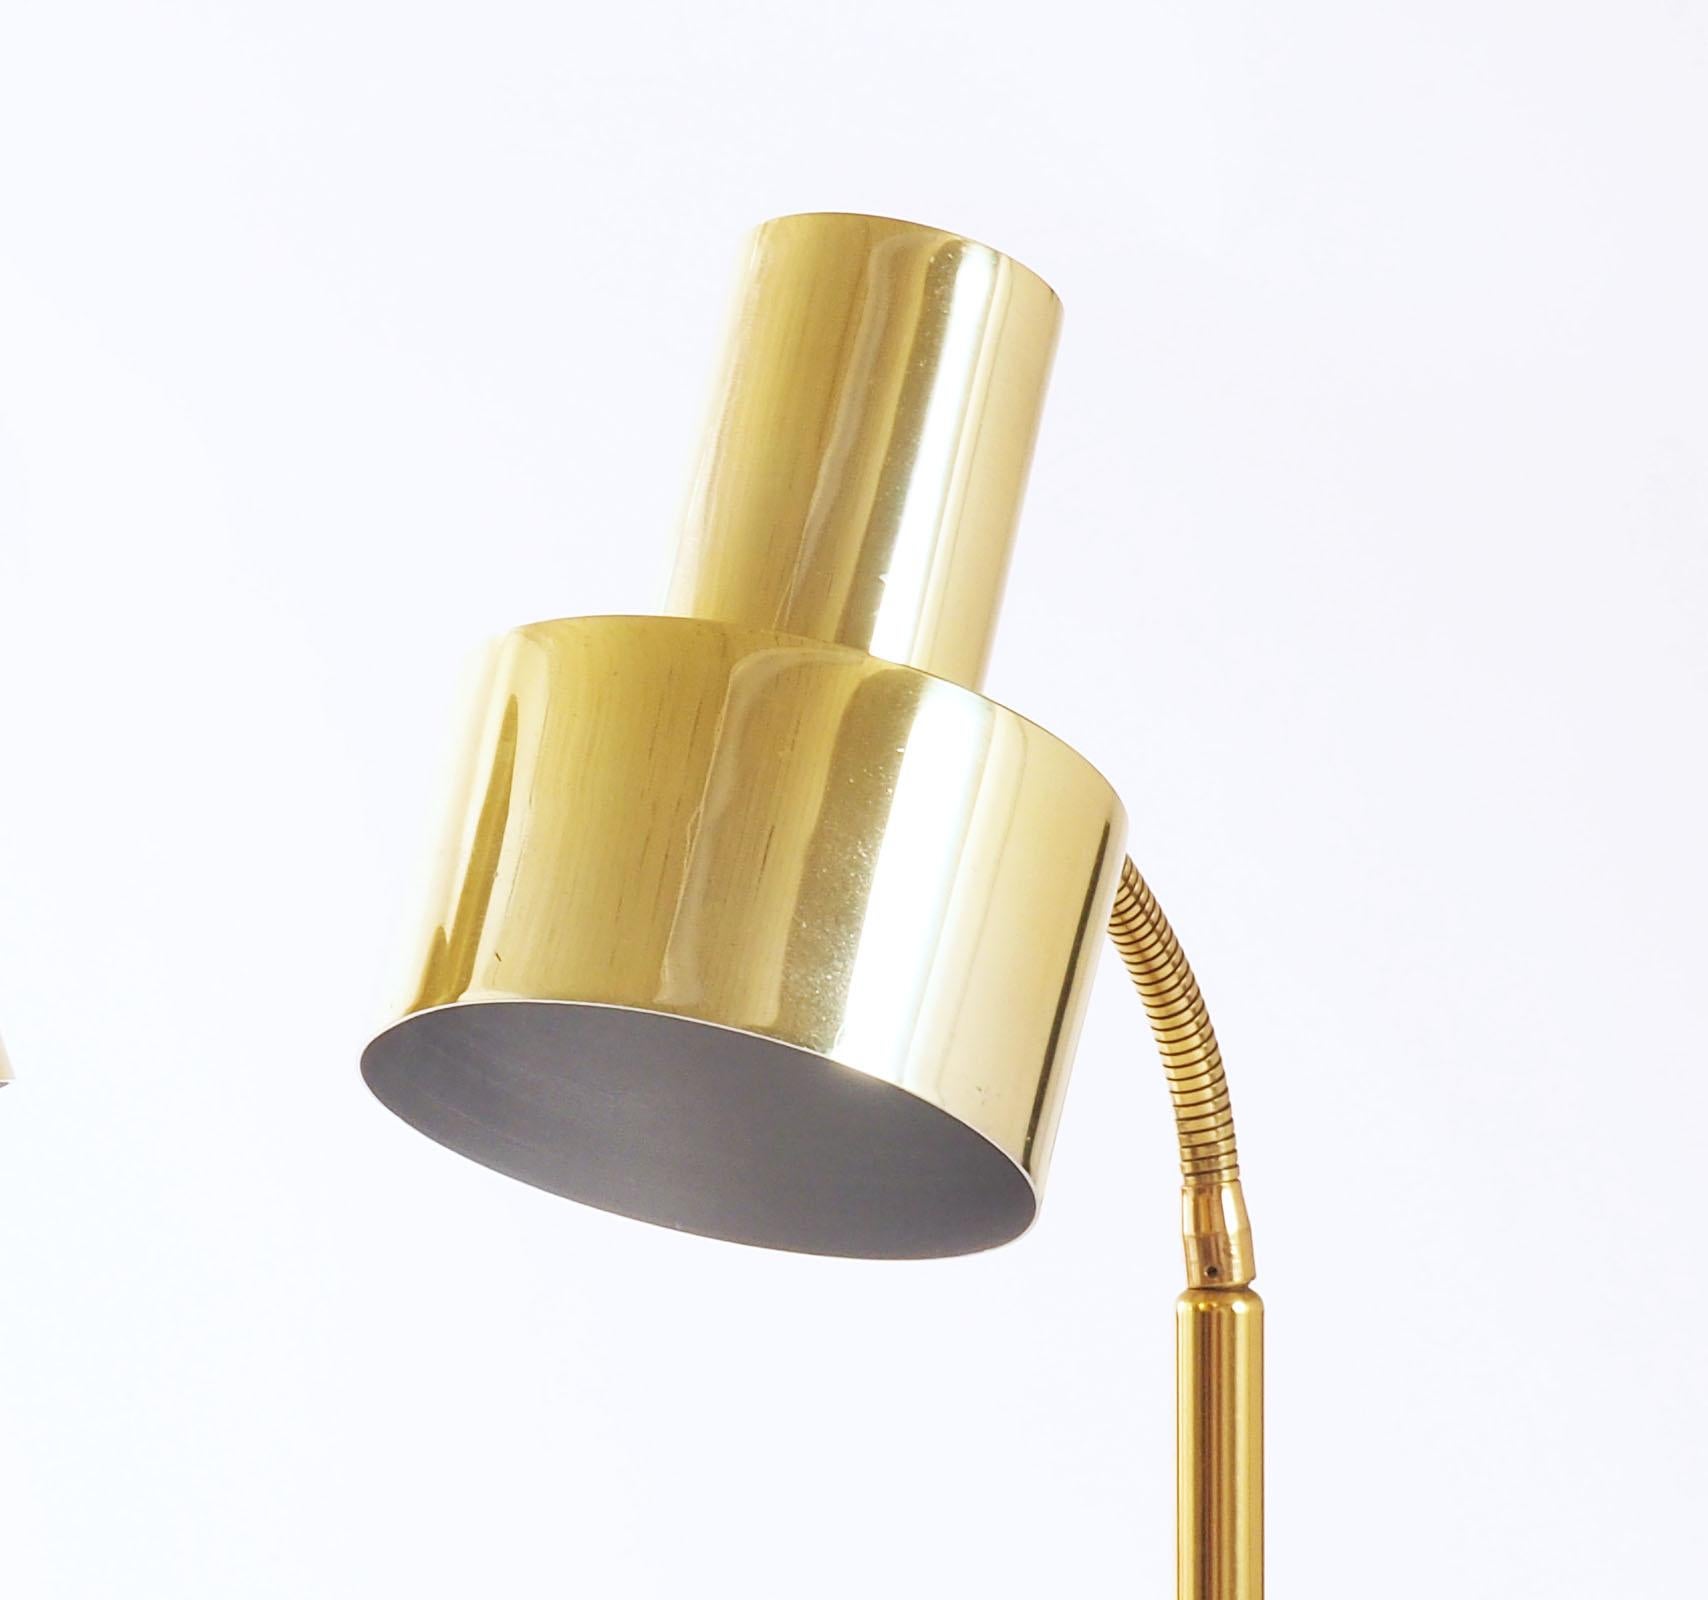 Scandinavian Modern Pair of Table Lamps in Brass by Boréns, Sweden